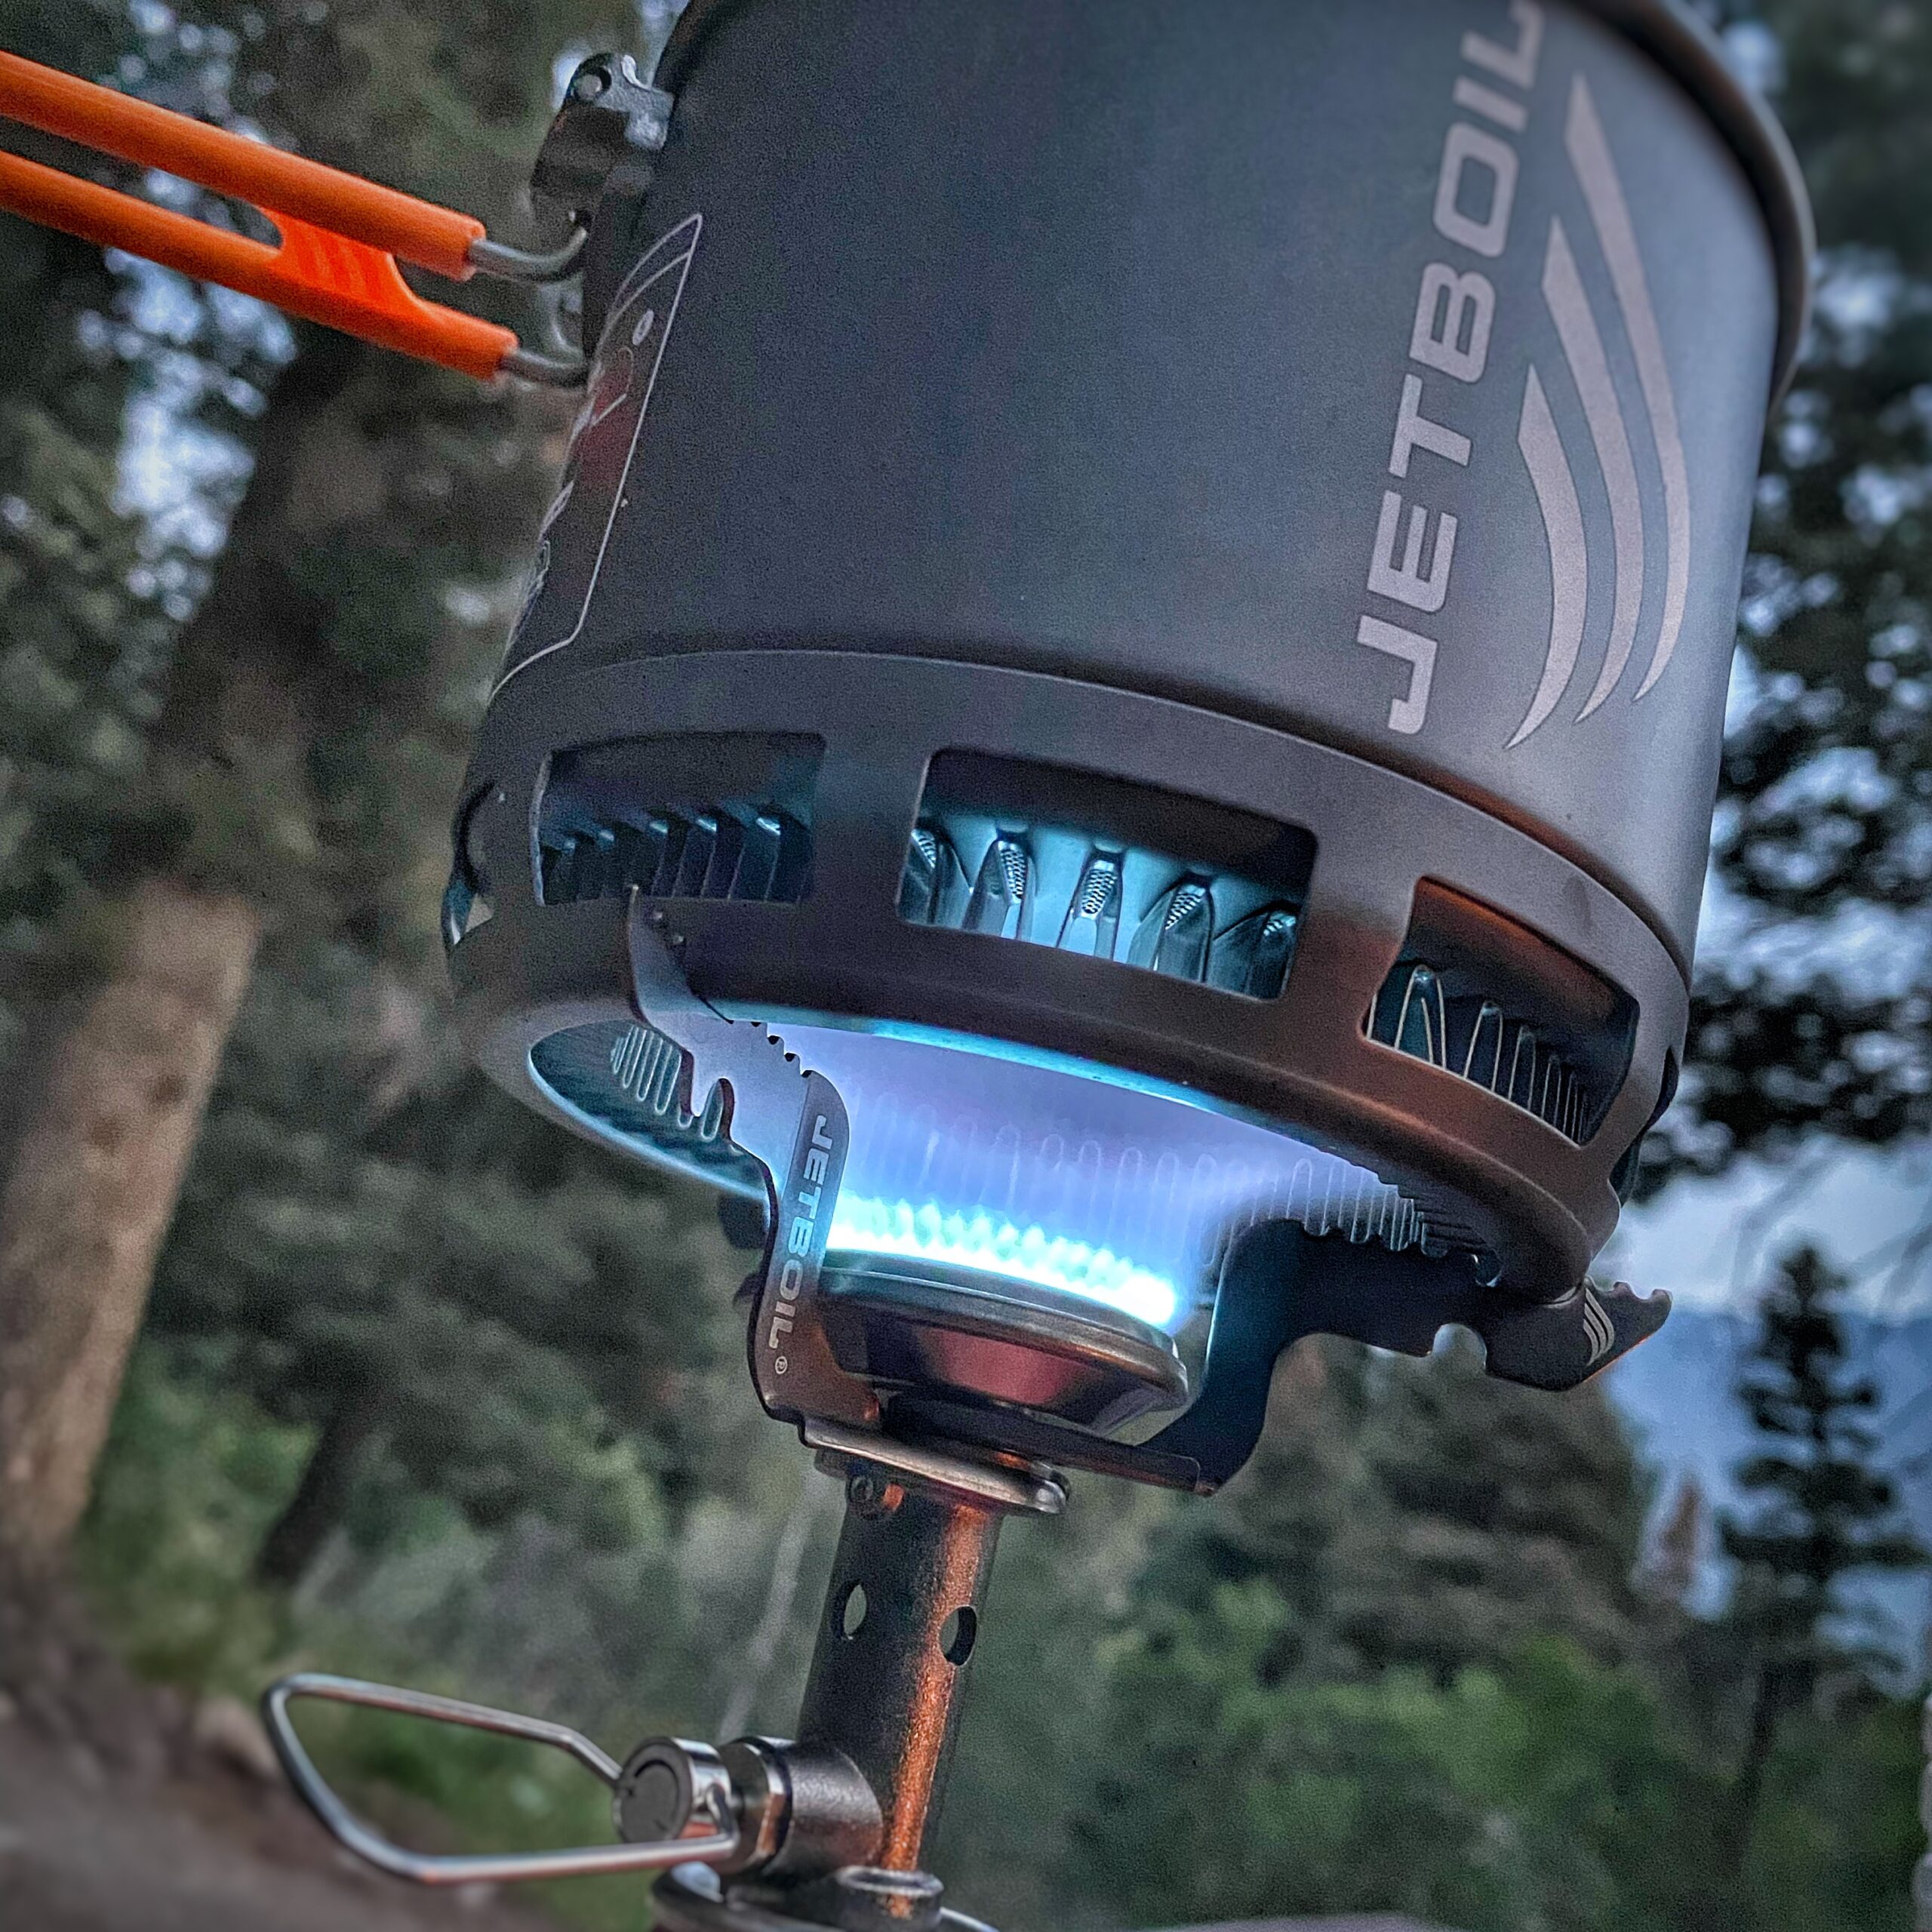 What I Hate About the Jetboil Stash and Why I Use It Anyway